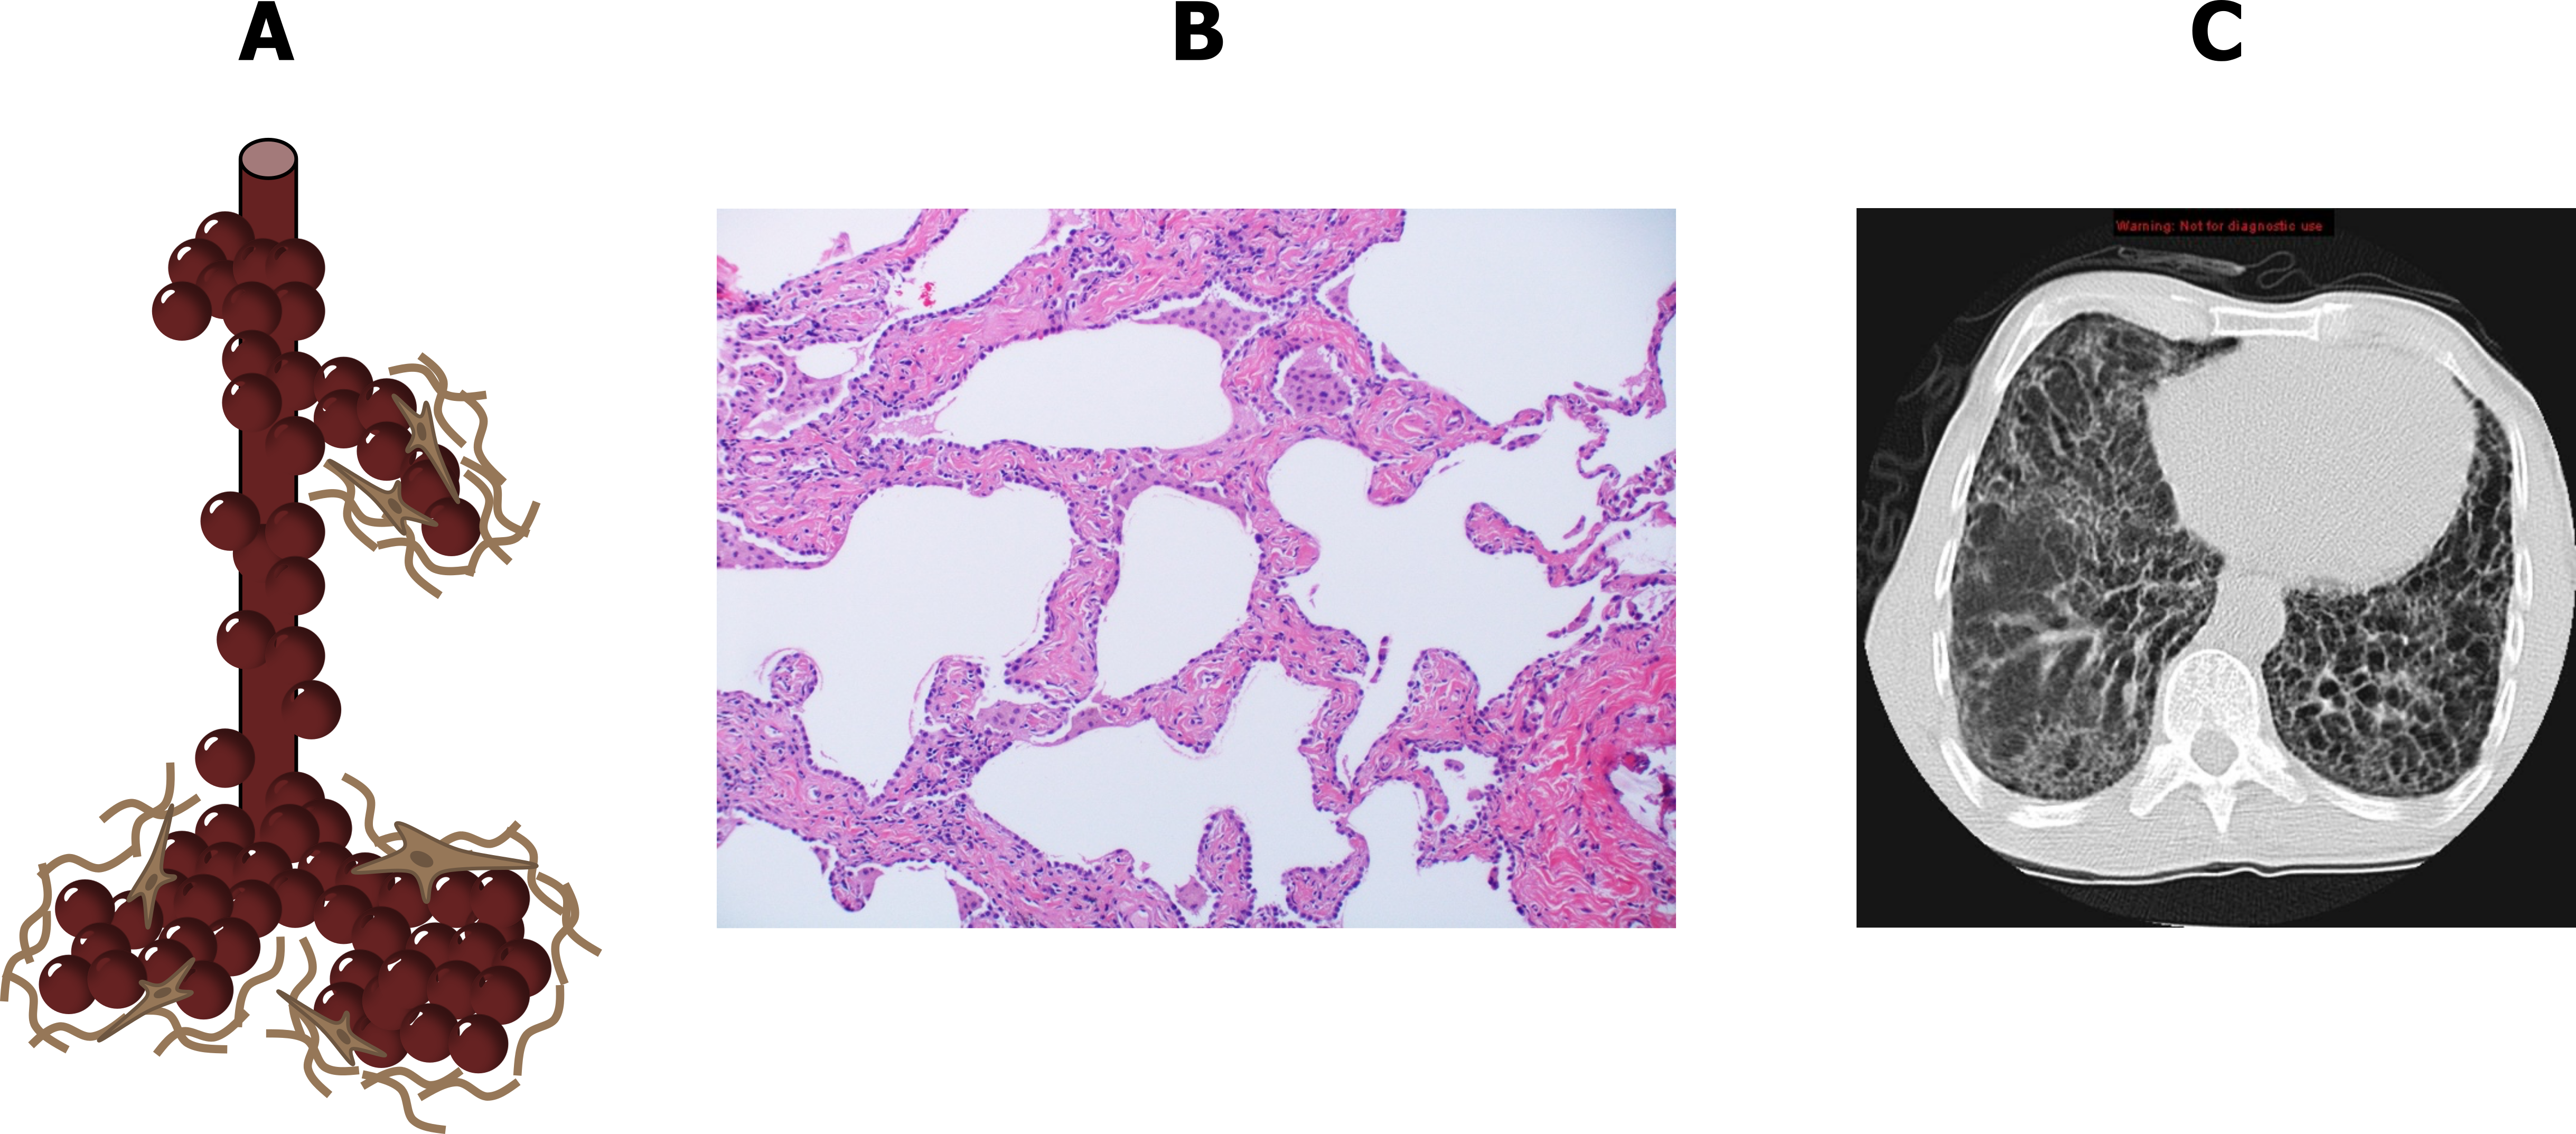 Three panels show different views of interstitial lung disease. The first (left) is a cartoon of an acinus in red that includes alveolar sacs as branches of an alveolar duct. The alveolar sacs are surrounded by brown lines depicting fibrotic material. The second image (middle)is a histological slide of alveolar walls that are thickening and contain fibrotic material. The third image (right) is a transverse section of a CT image of the lung. Distinct, abnormal tissue is apparent with a distinct honeycombing pattern of large 'holes' in the lung tissue.